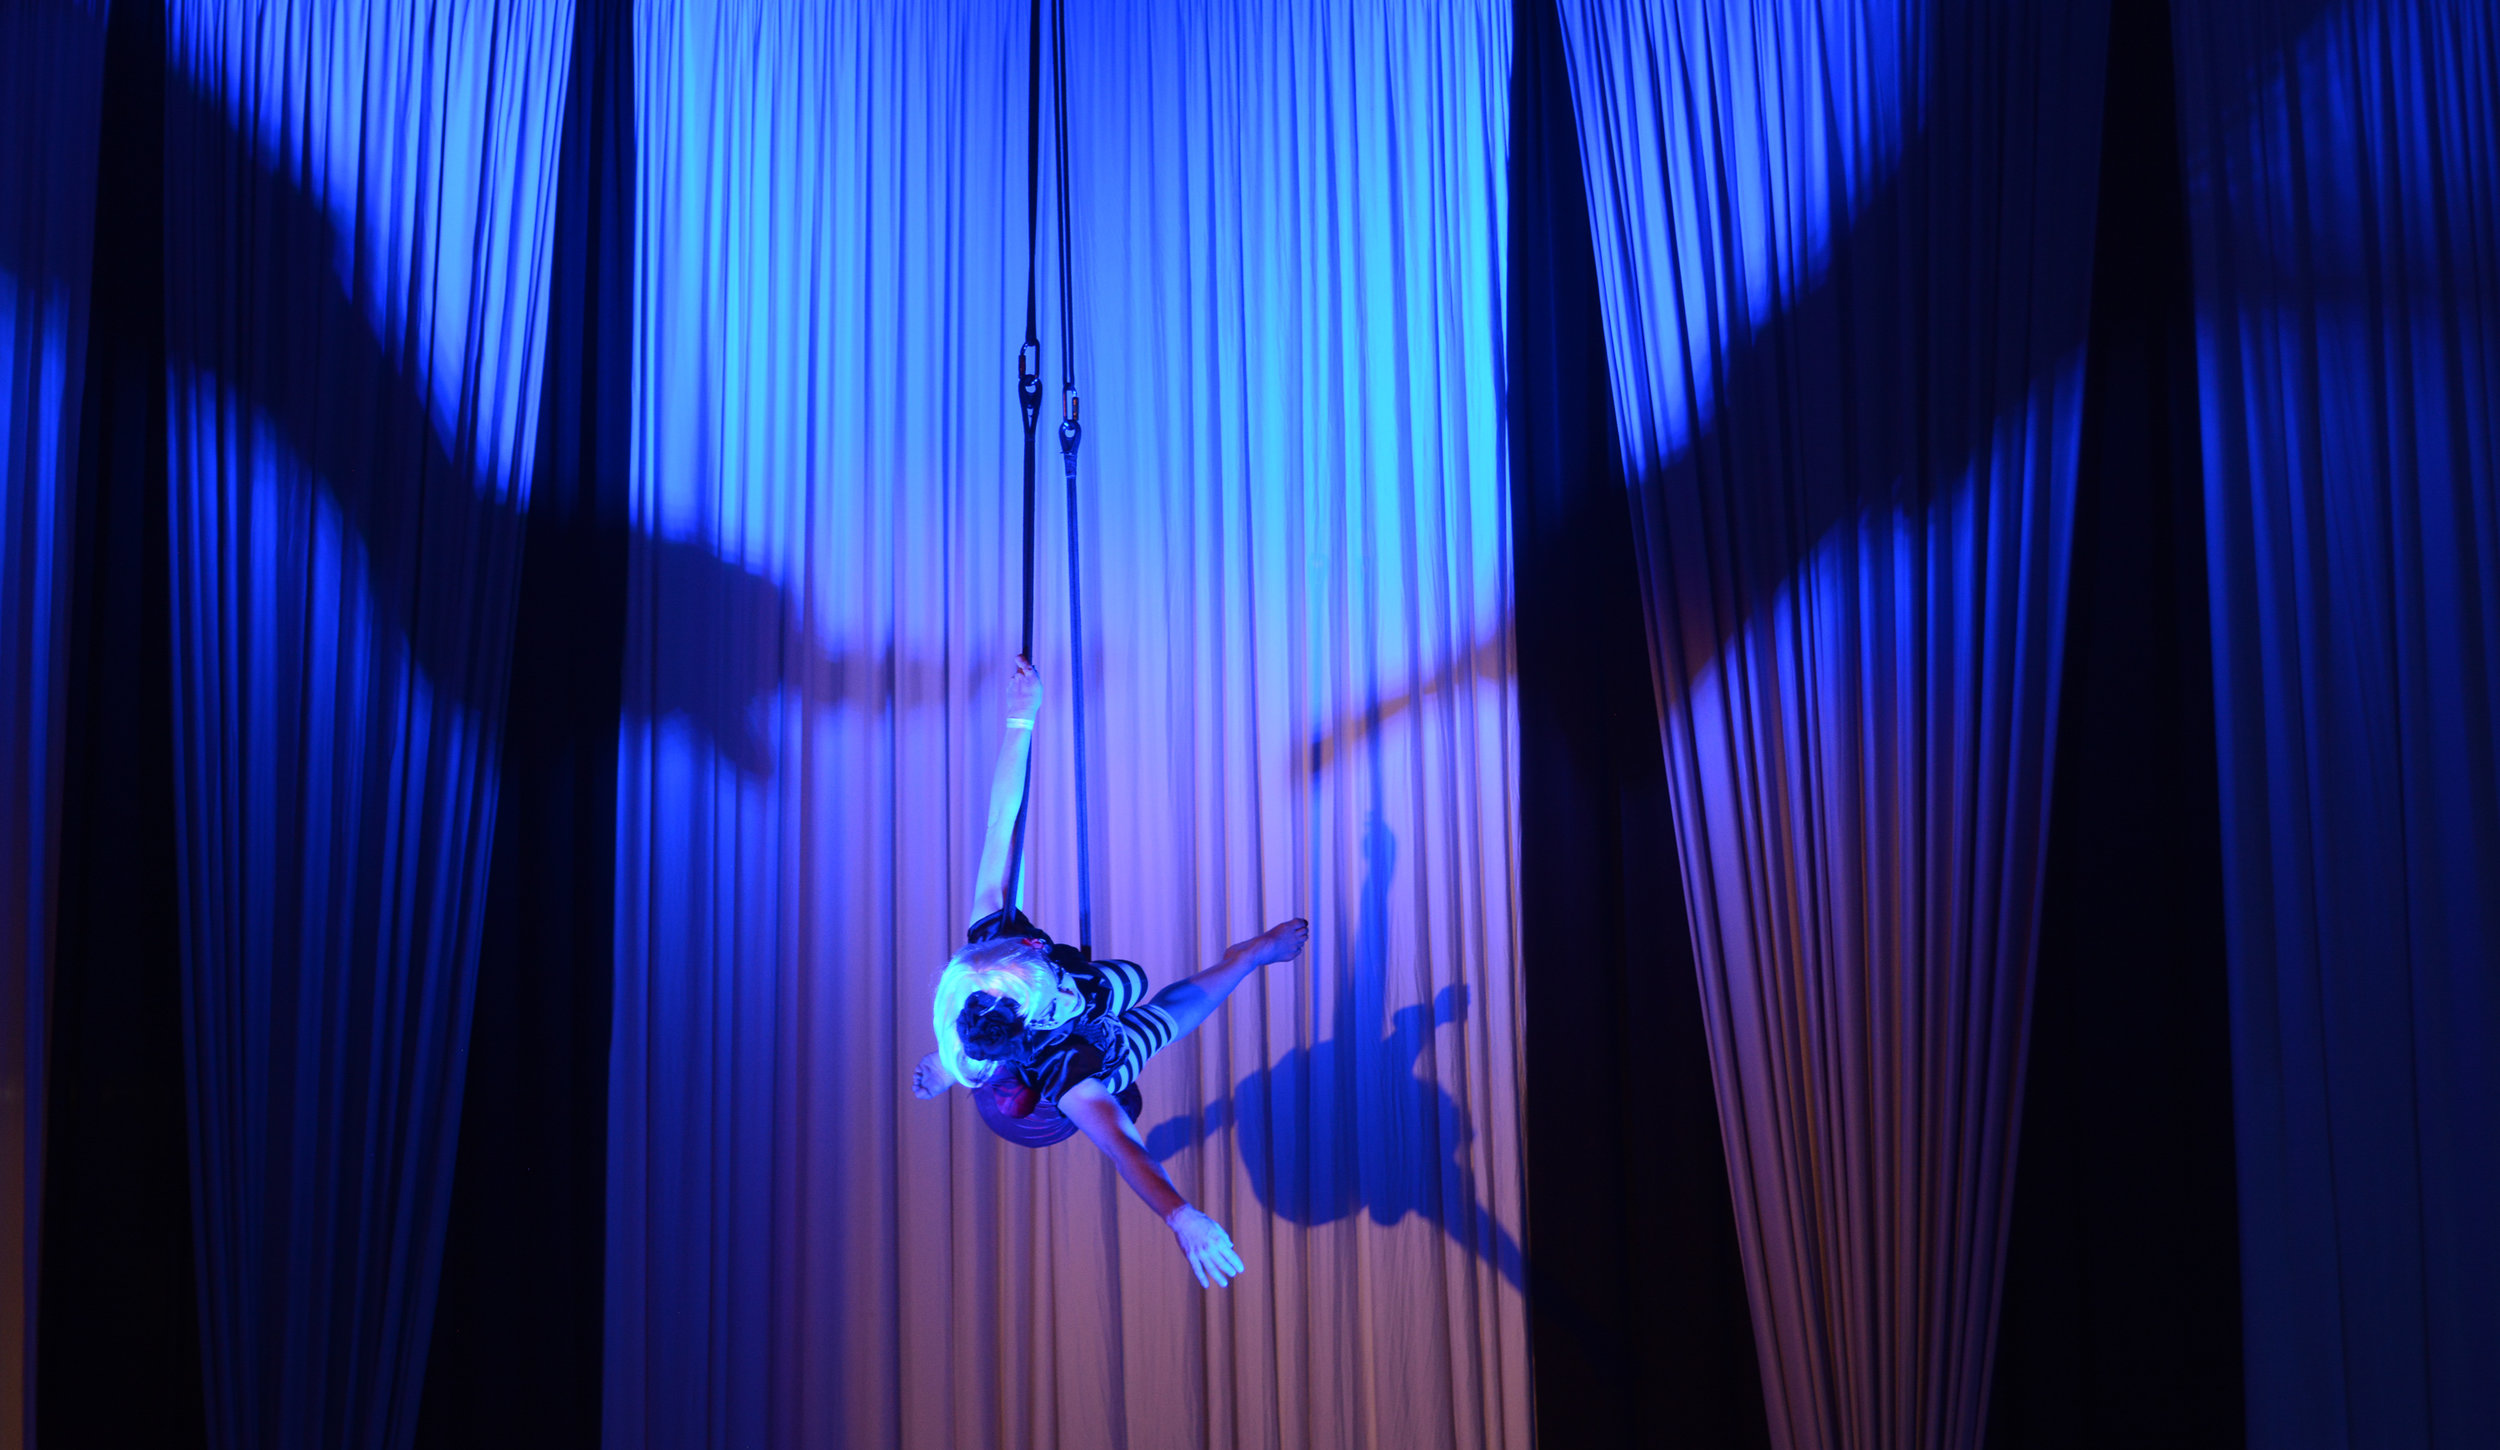 An aerialist performs at a corporate event.